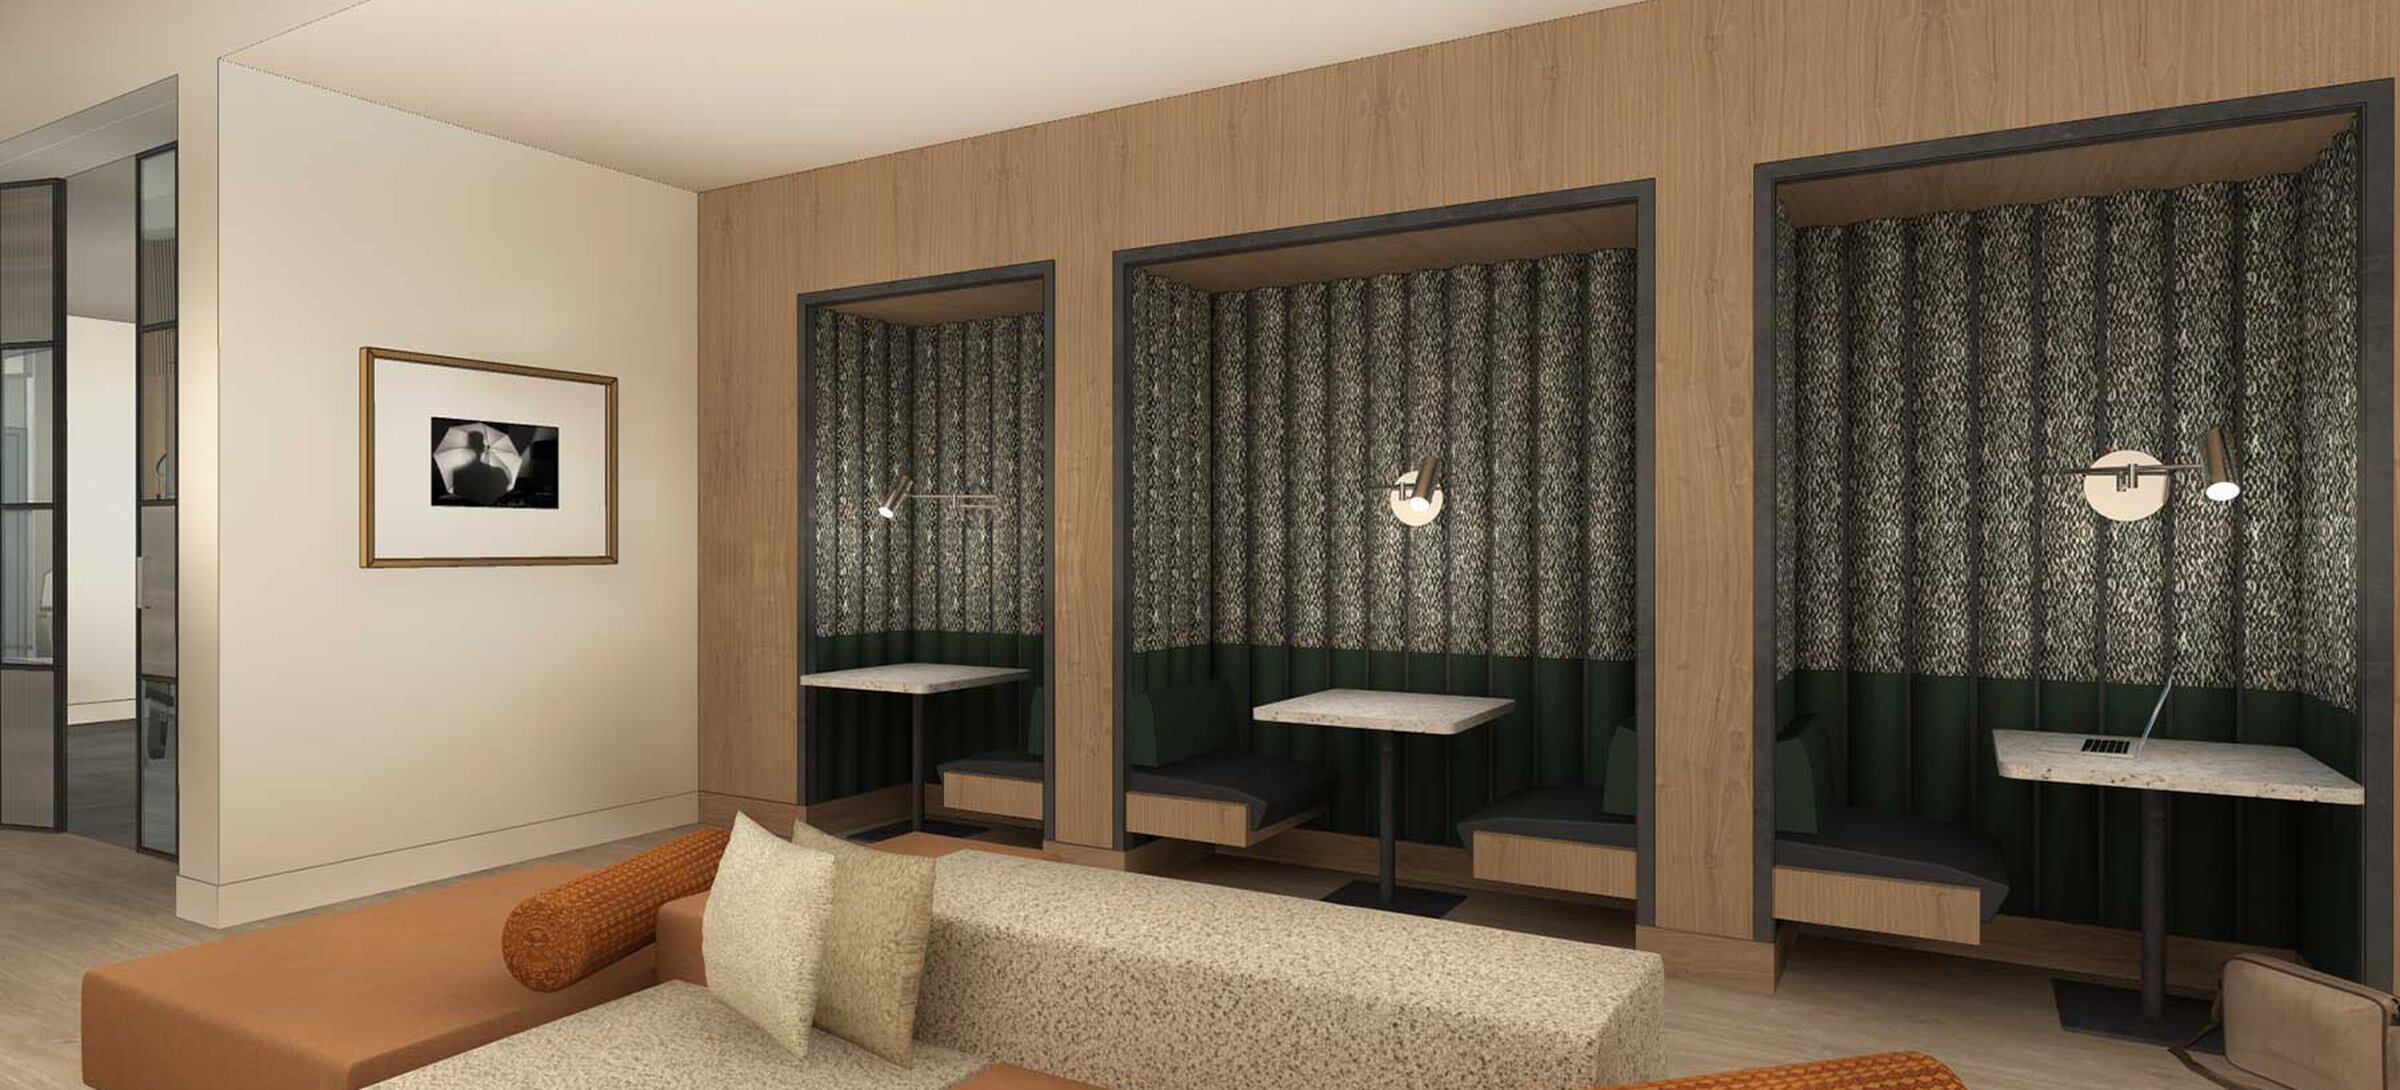 Coming Soon: Renovated residents lounge with entertaining kitchenette, lounge seating, and study pods (Rendering)